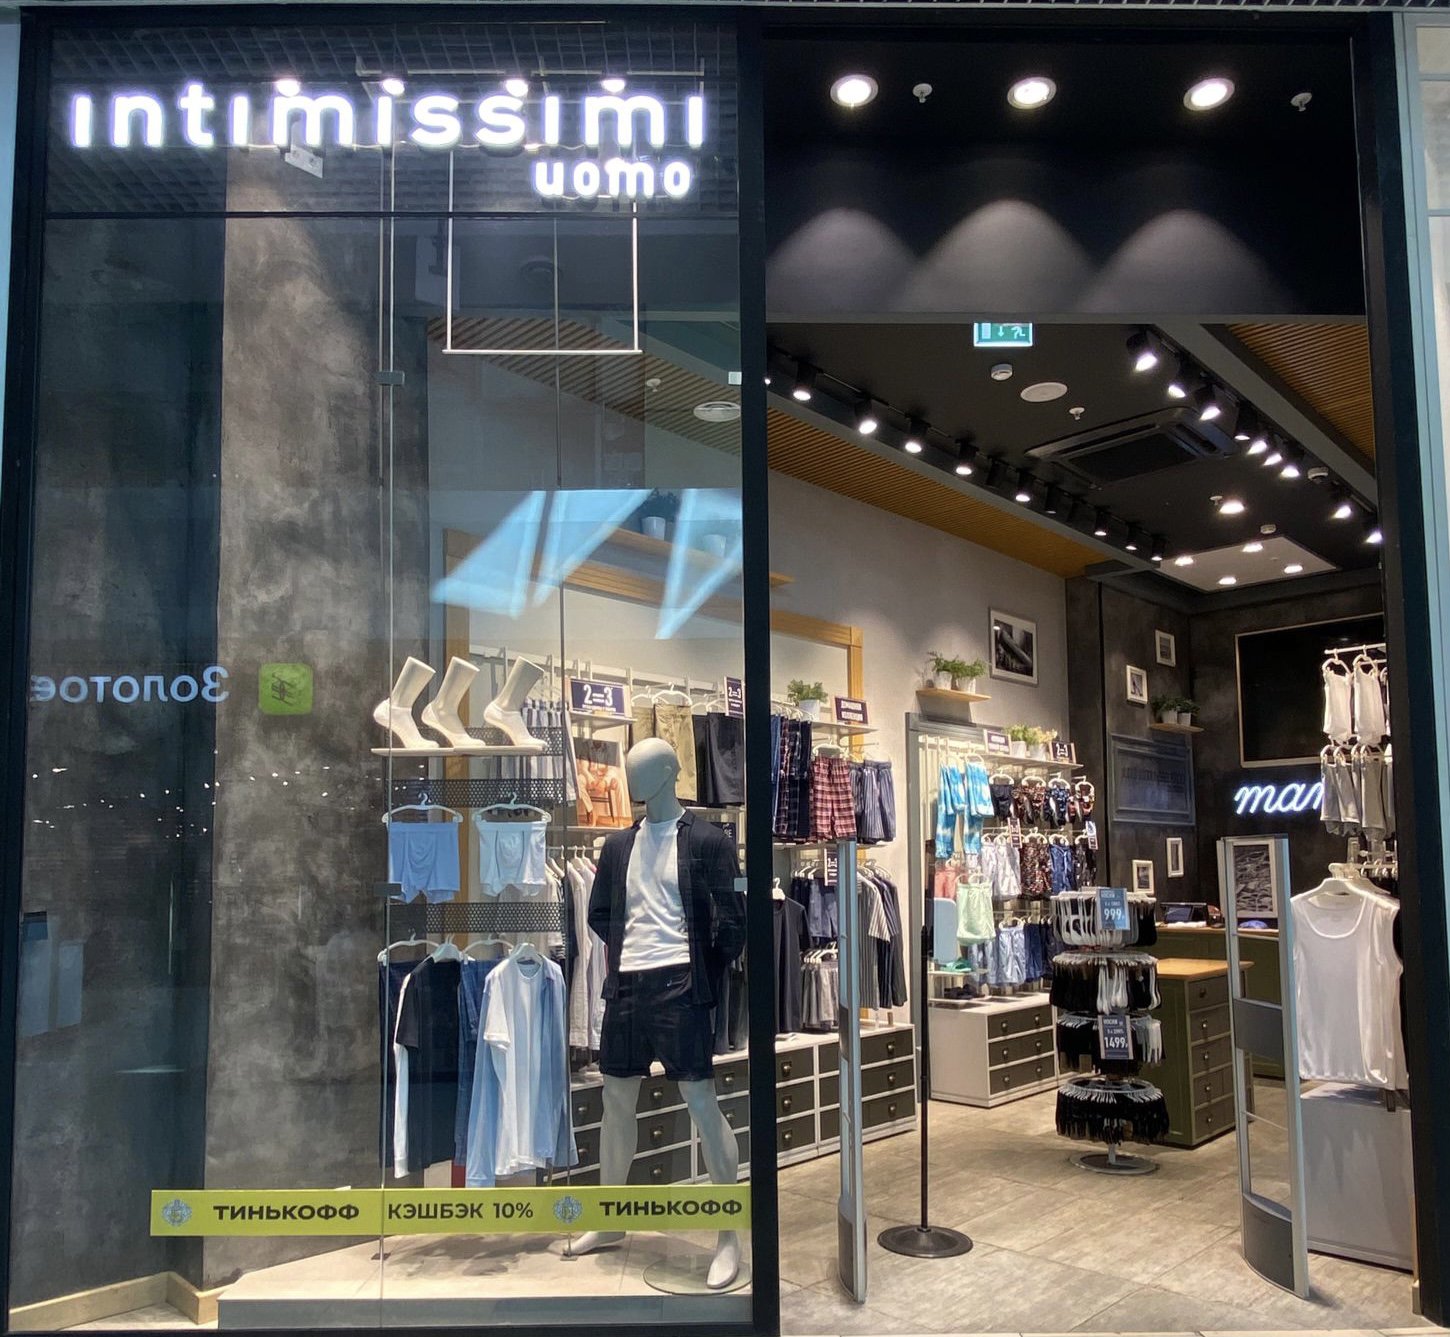 https://www.intimissimi.com/on/demandware.static/-/Library-Sites-IntimissimiContentLibrary/default/dw4e27037b/storeImages/IUO_IAS4_001.jpg